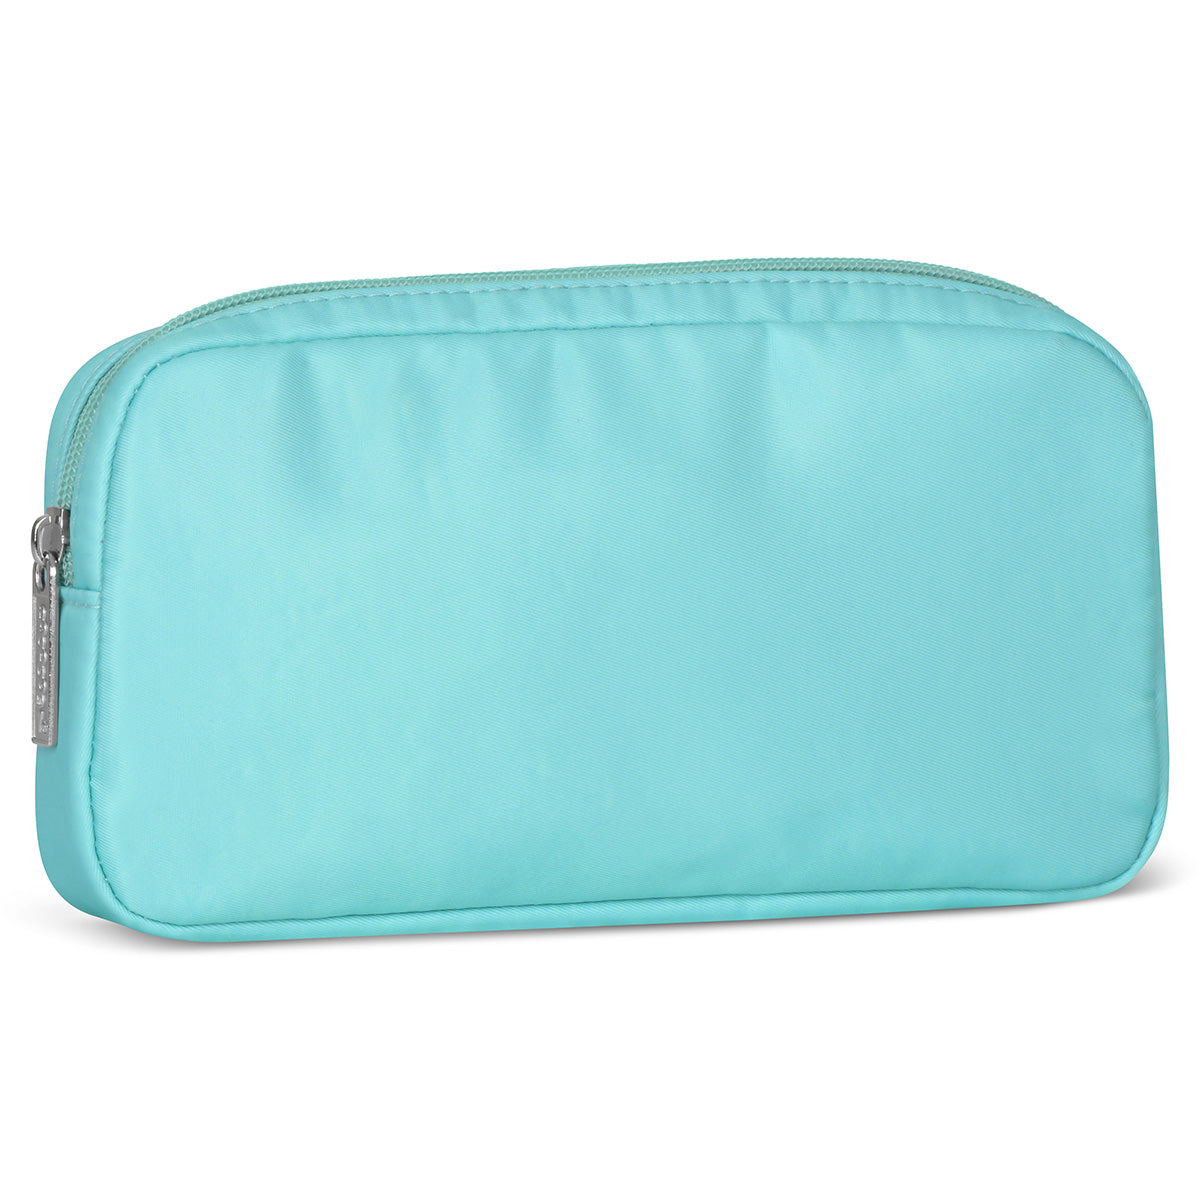 Blue Small Cosmetic Bag Cover